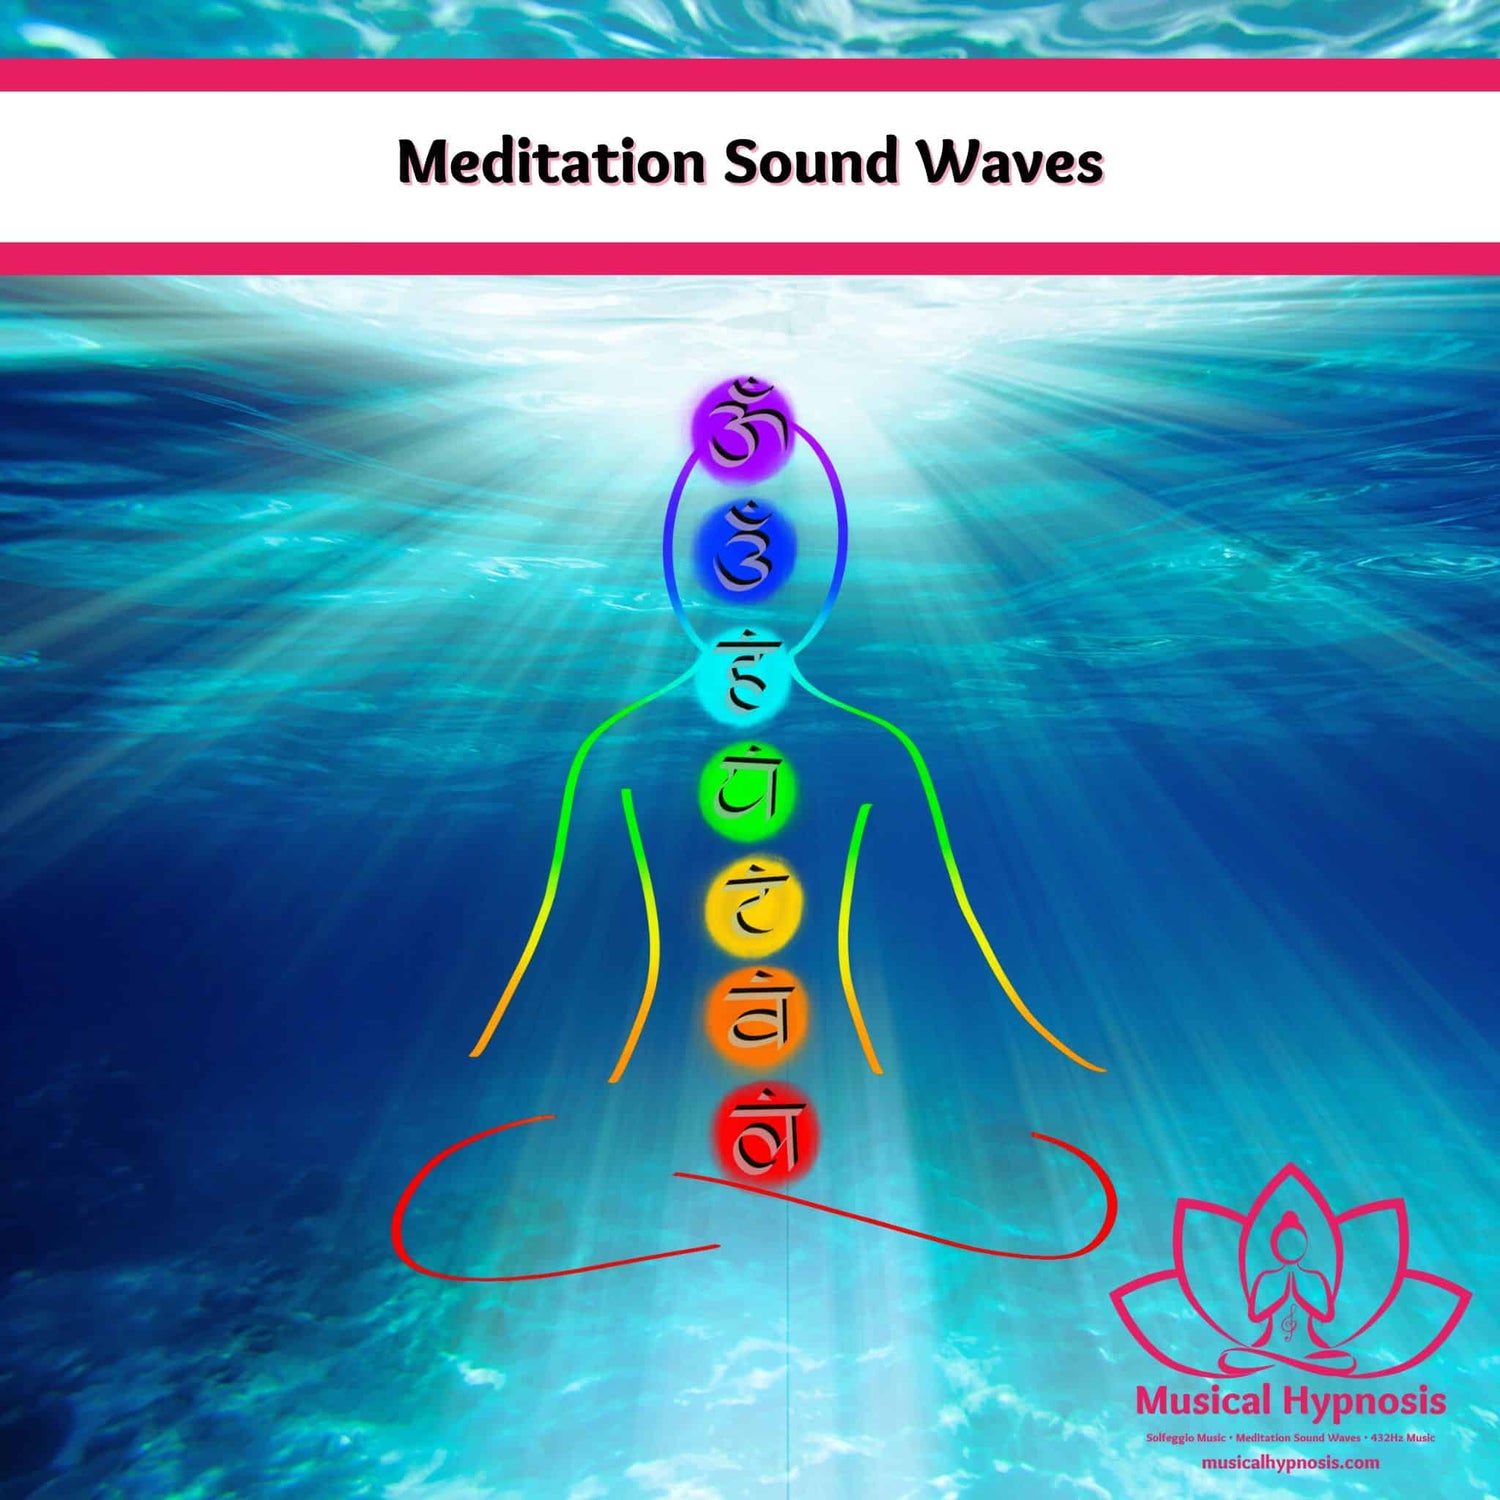 Meditation Sound Waves Also Known As Binaural Beats and Isochronic Tones